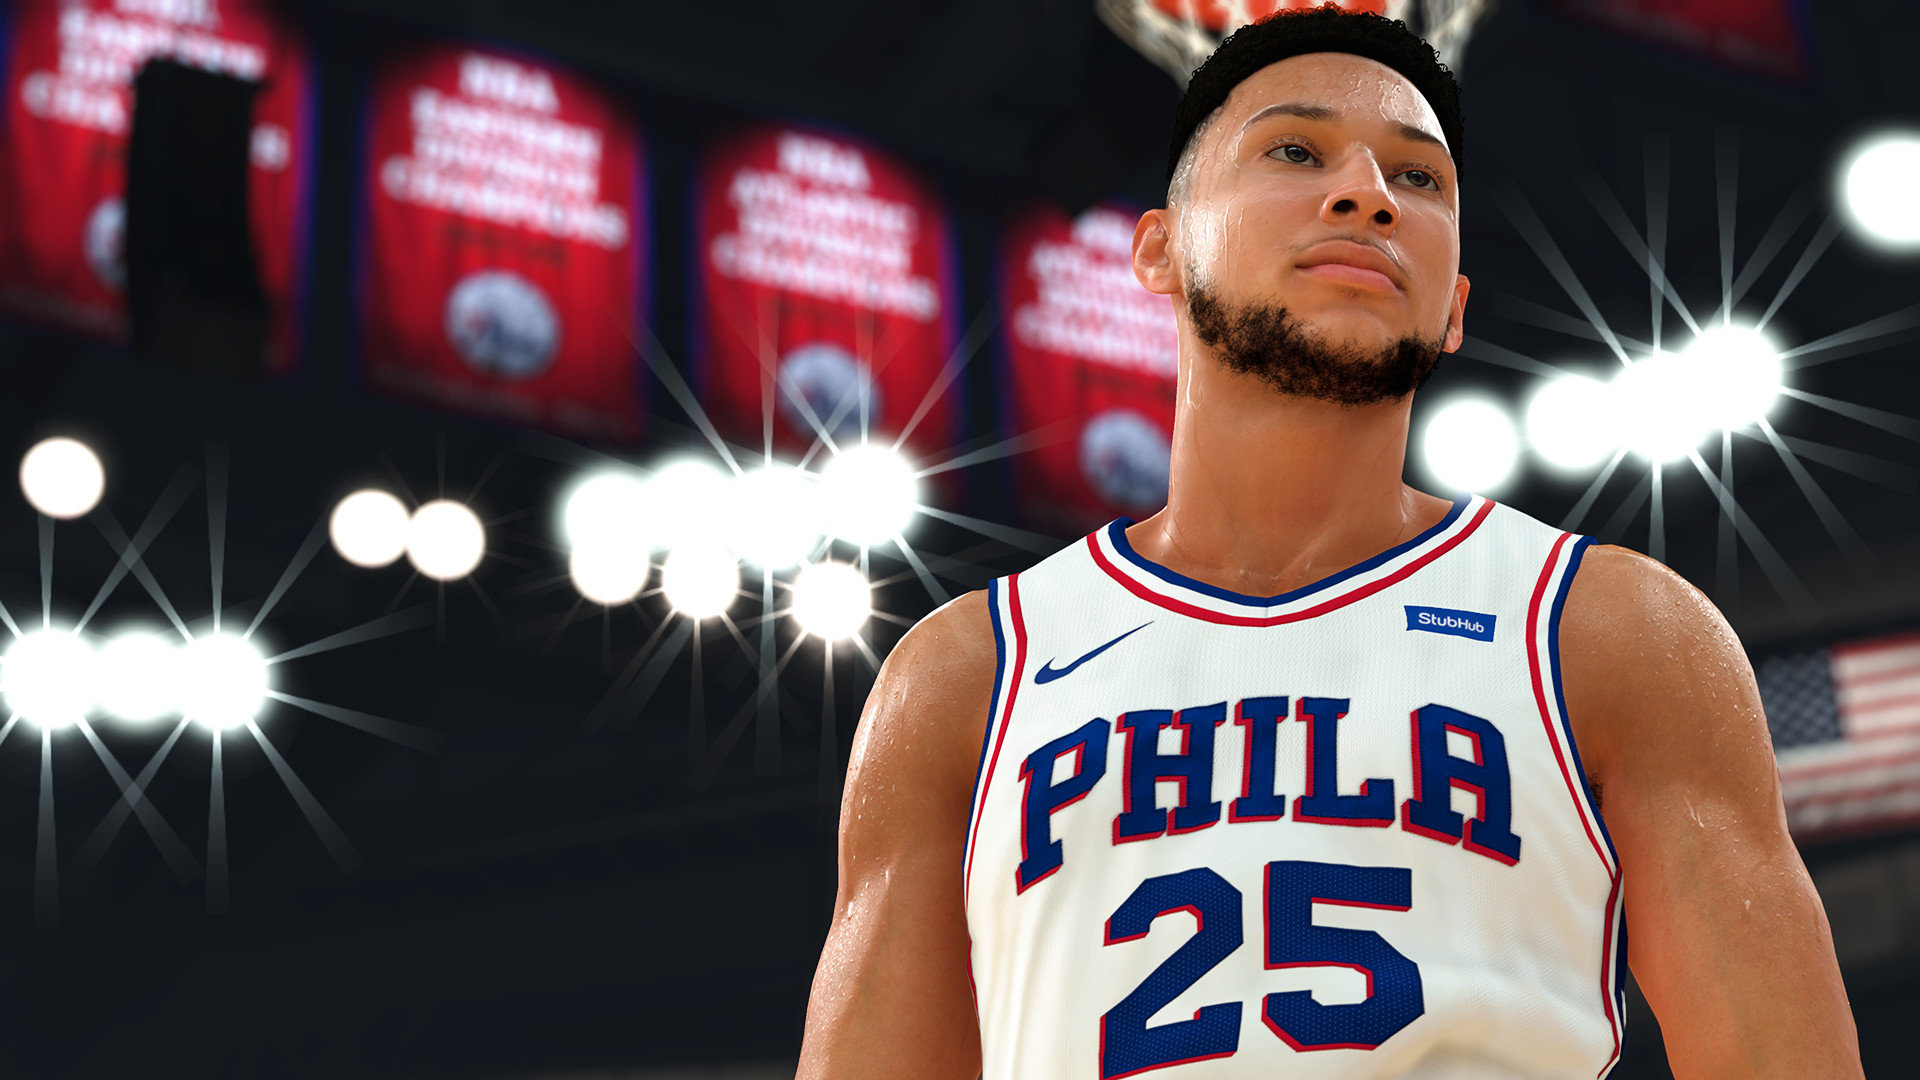 2K asks fans to tell Belgium they want loot boxes